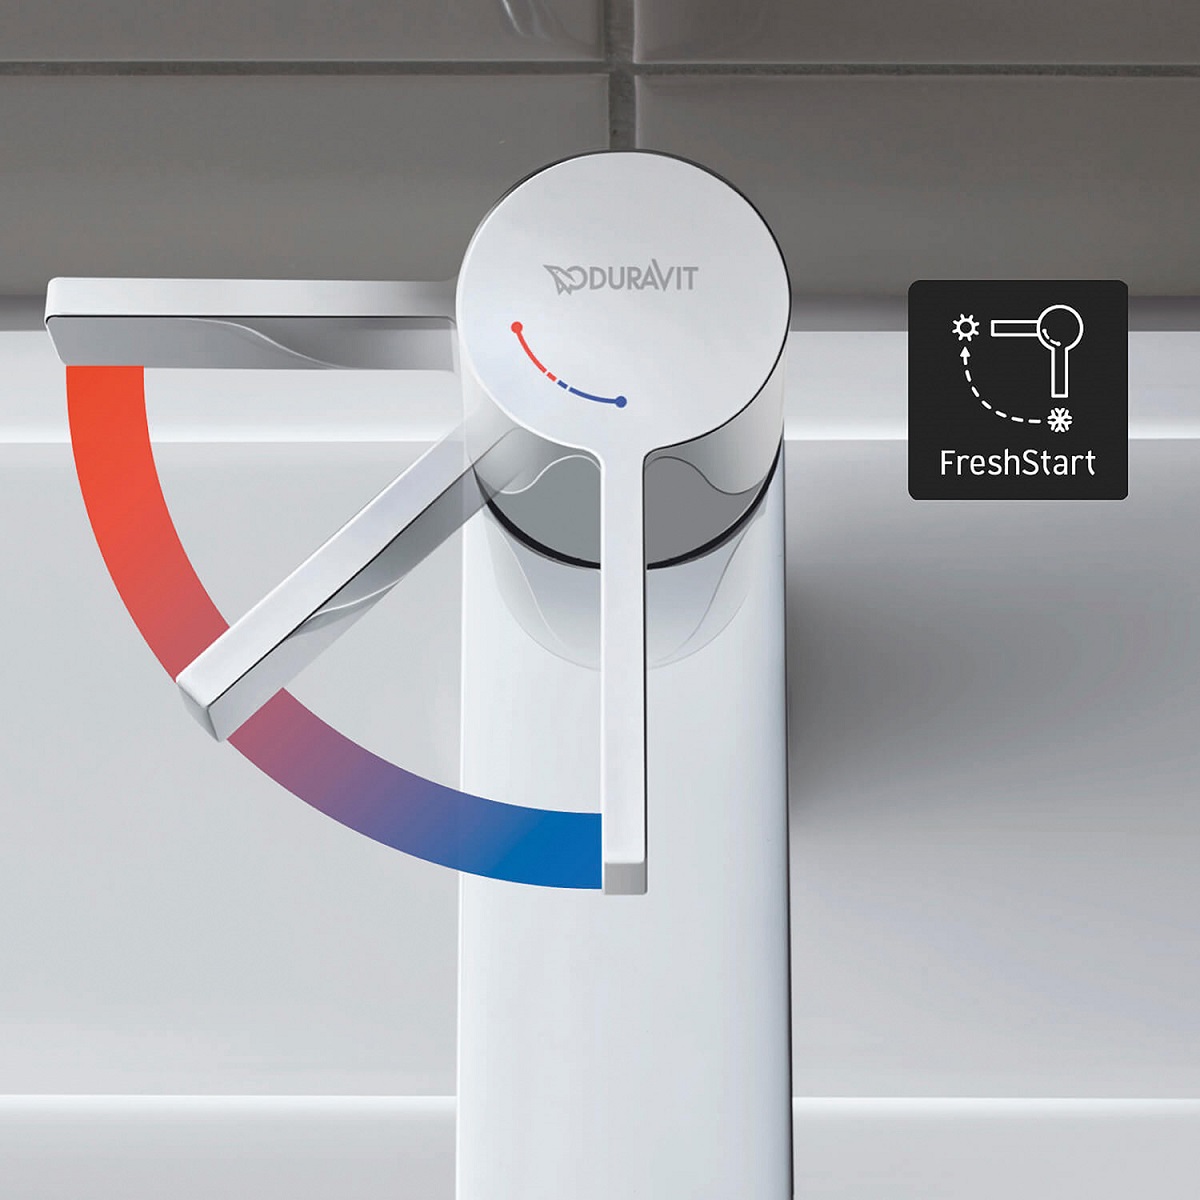 Image caption: With the single-lever mixers in the energy-savingFreshStart variant, only cold-water flows in the middle position. The water is only heated when the lever is actively turned to the left. | Image credit: Duravit AG